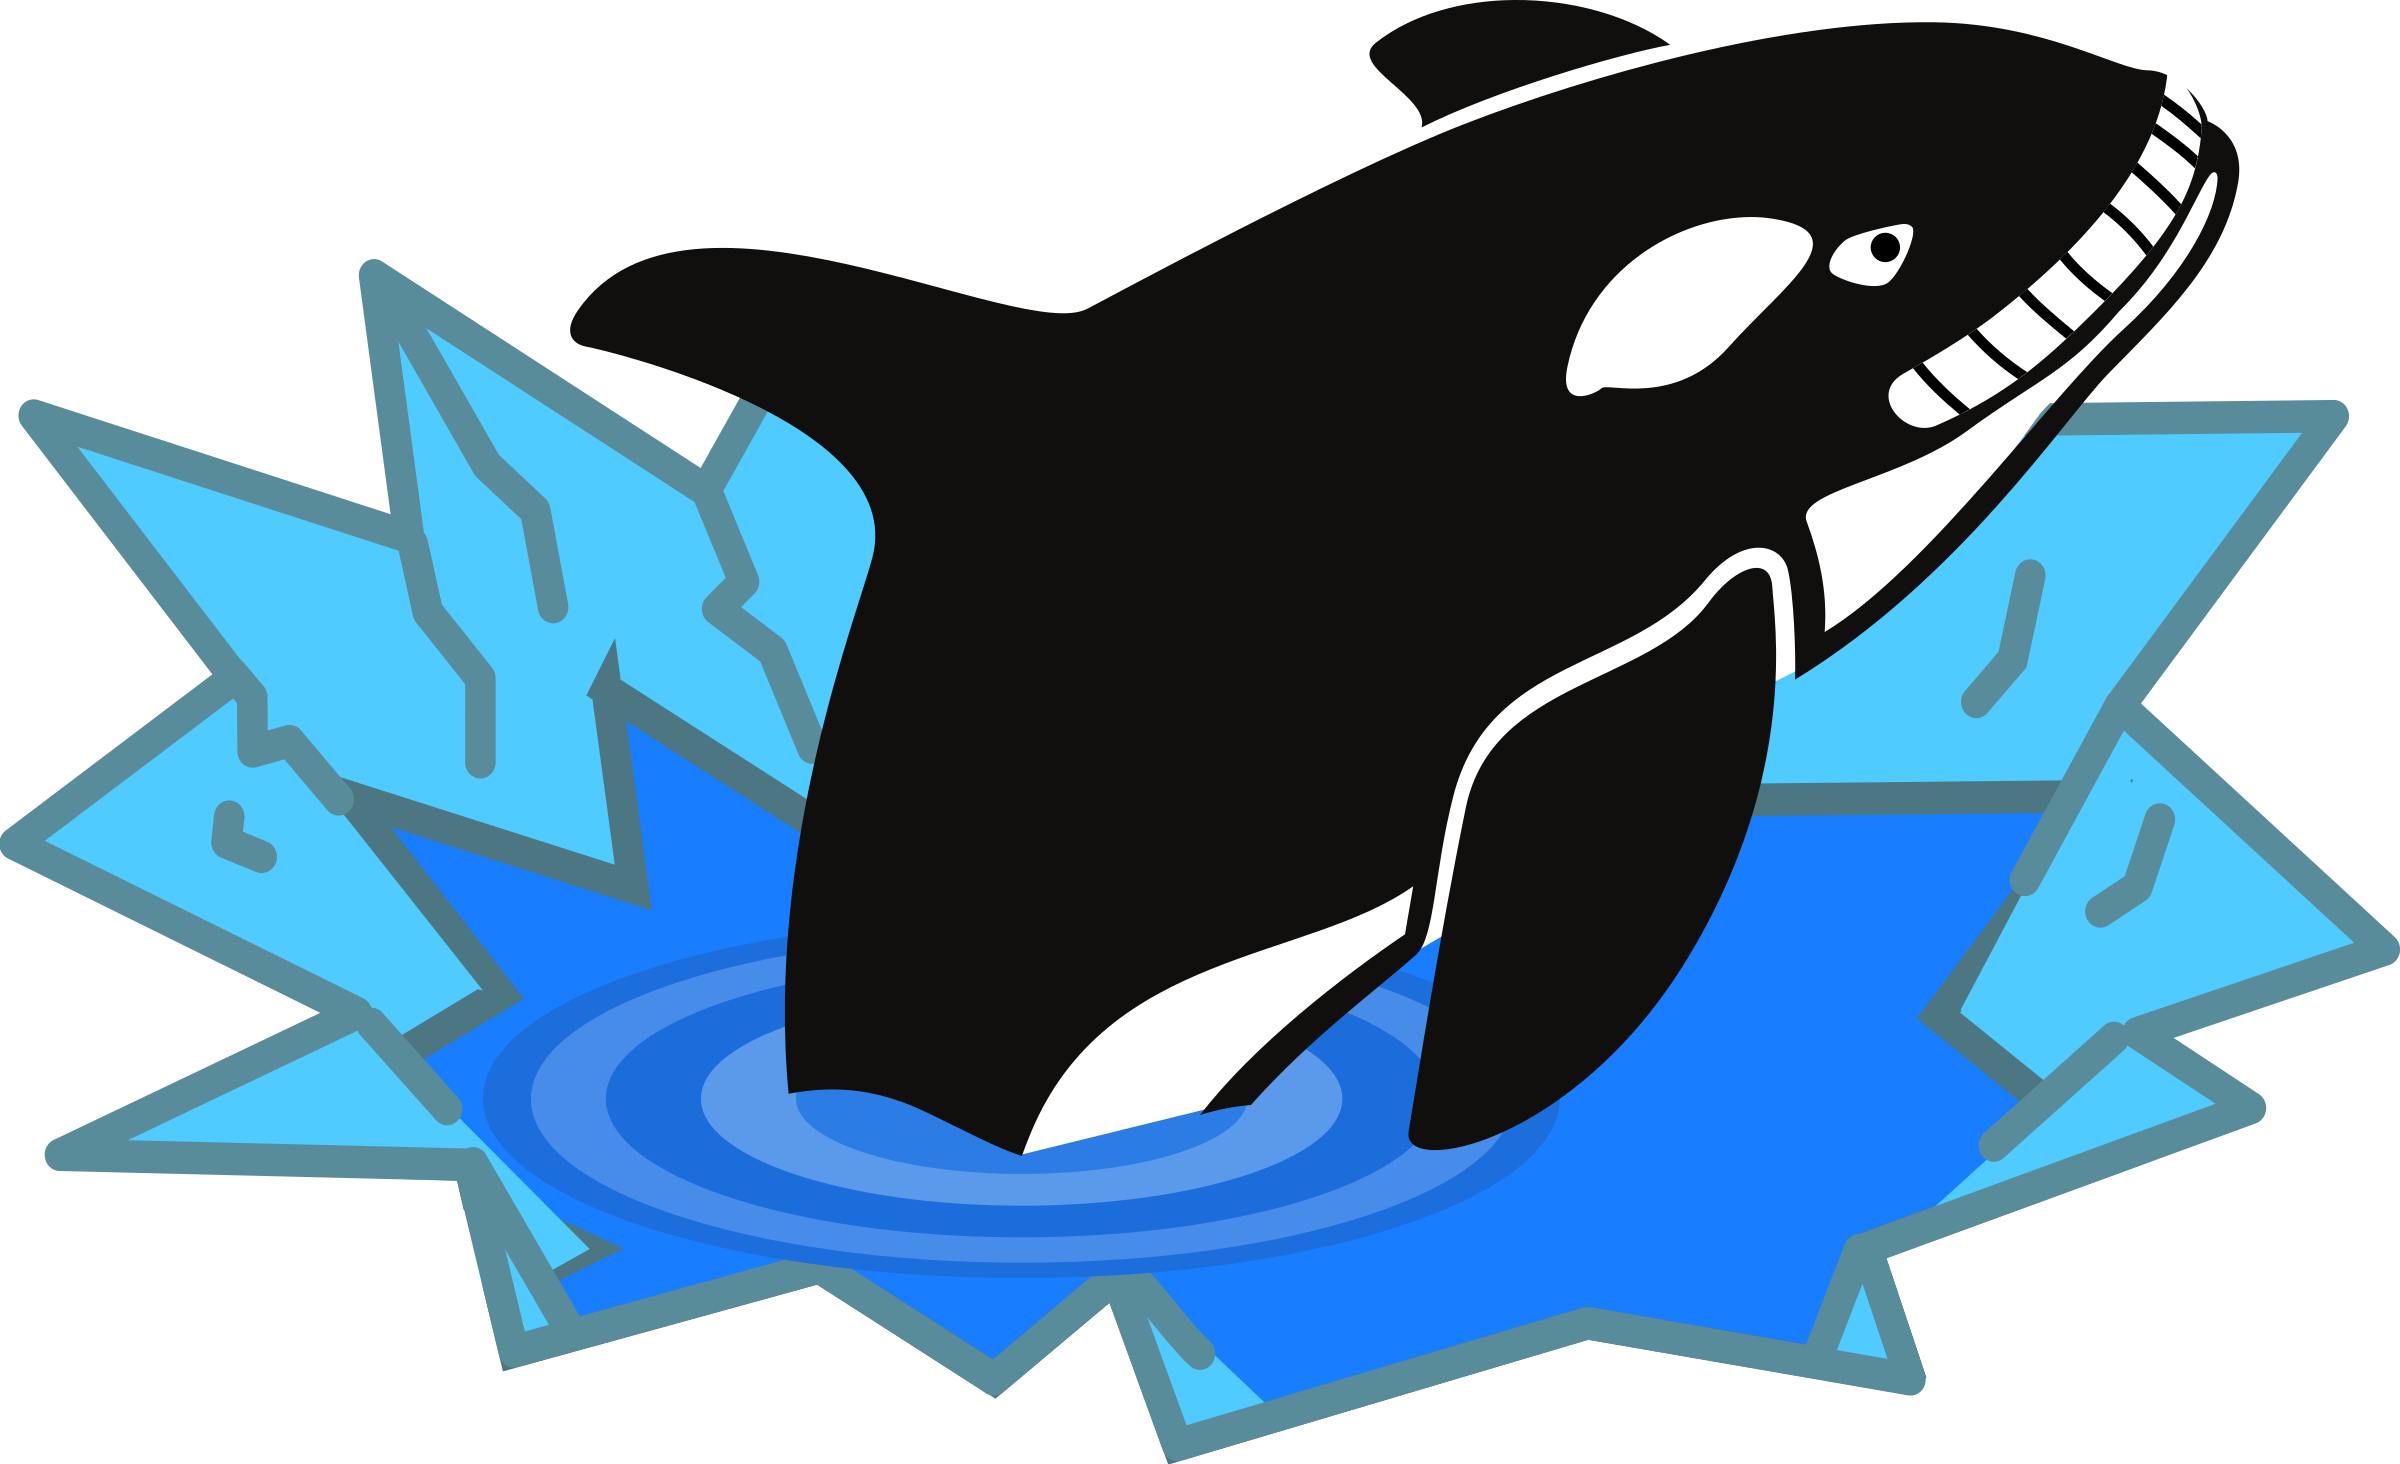 Evil Orca Cartoon Looking and Smiling with teeth SVG Clip arts